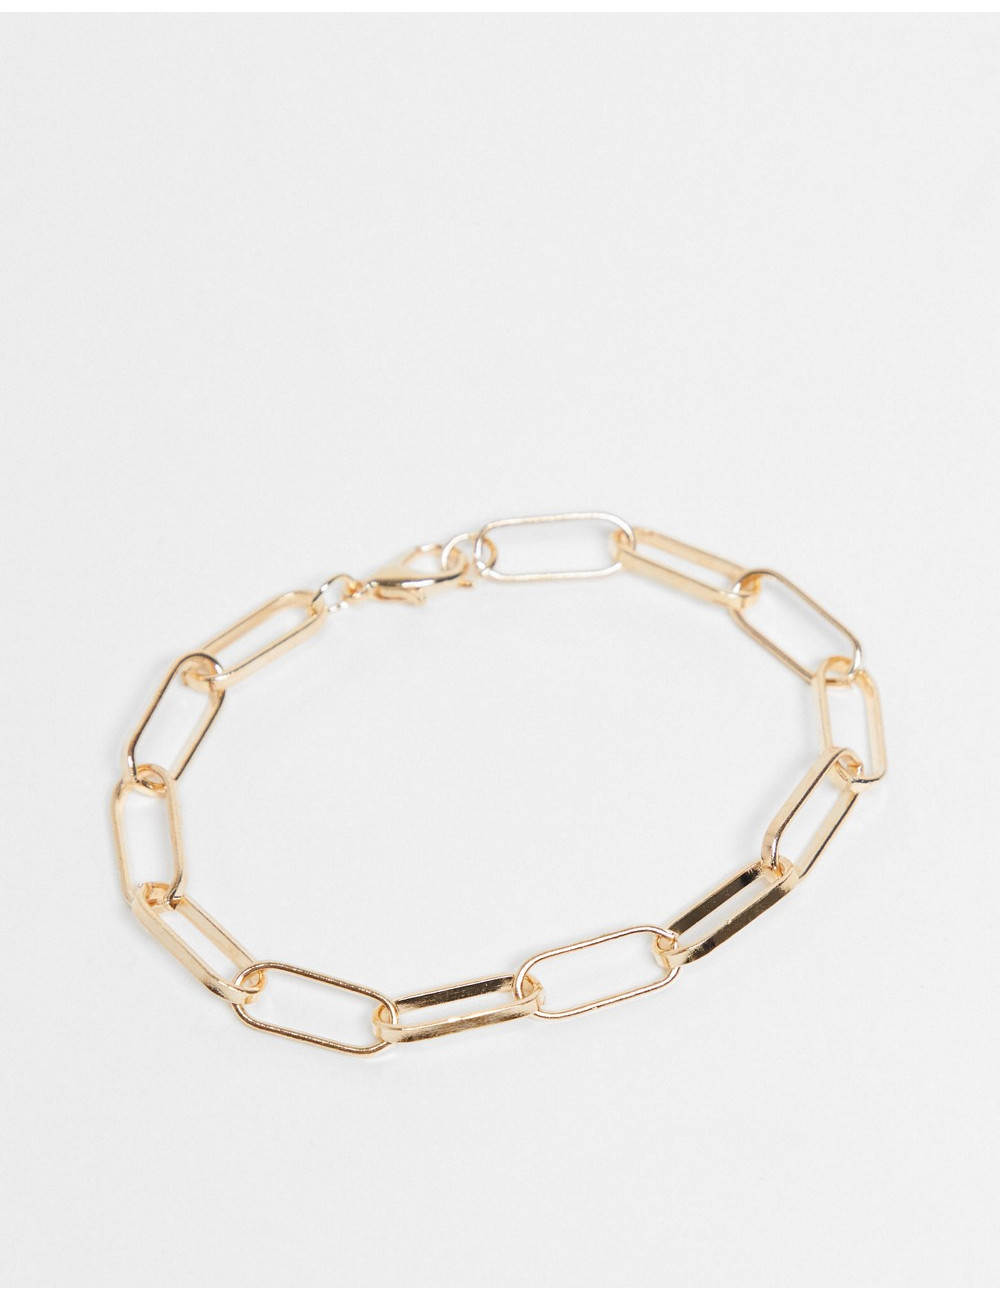 Ego chain link anklet in gold